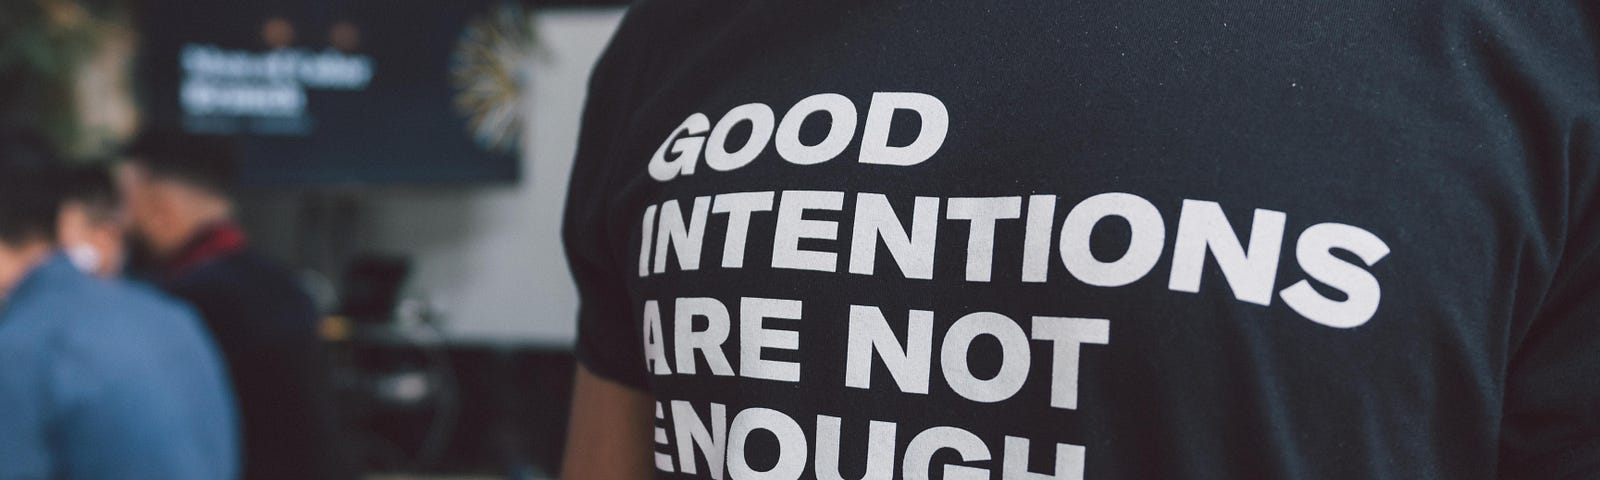 This is a photo of a person wearing a tshirt that says “good intentions are not enough”